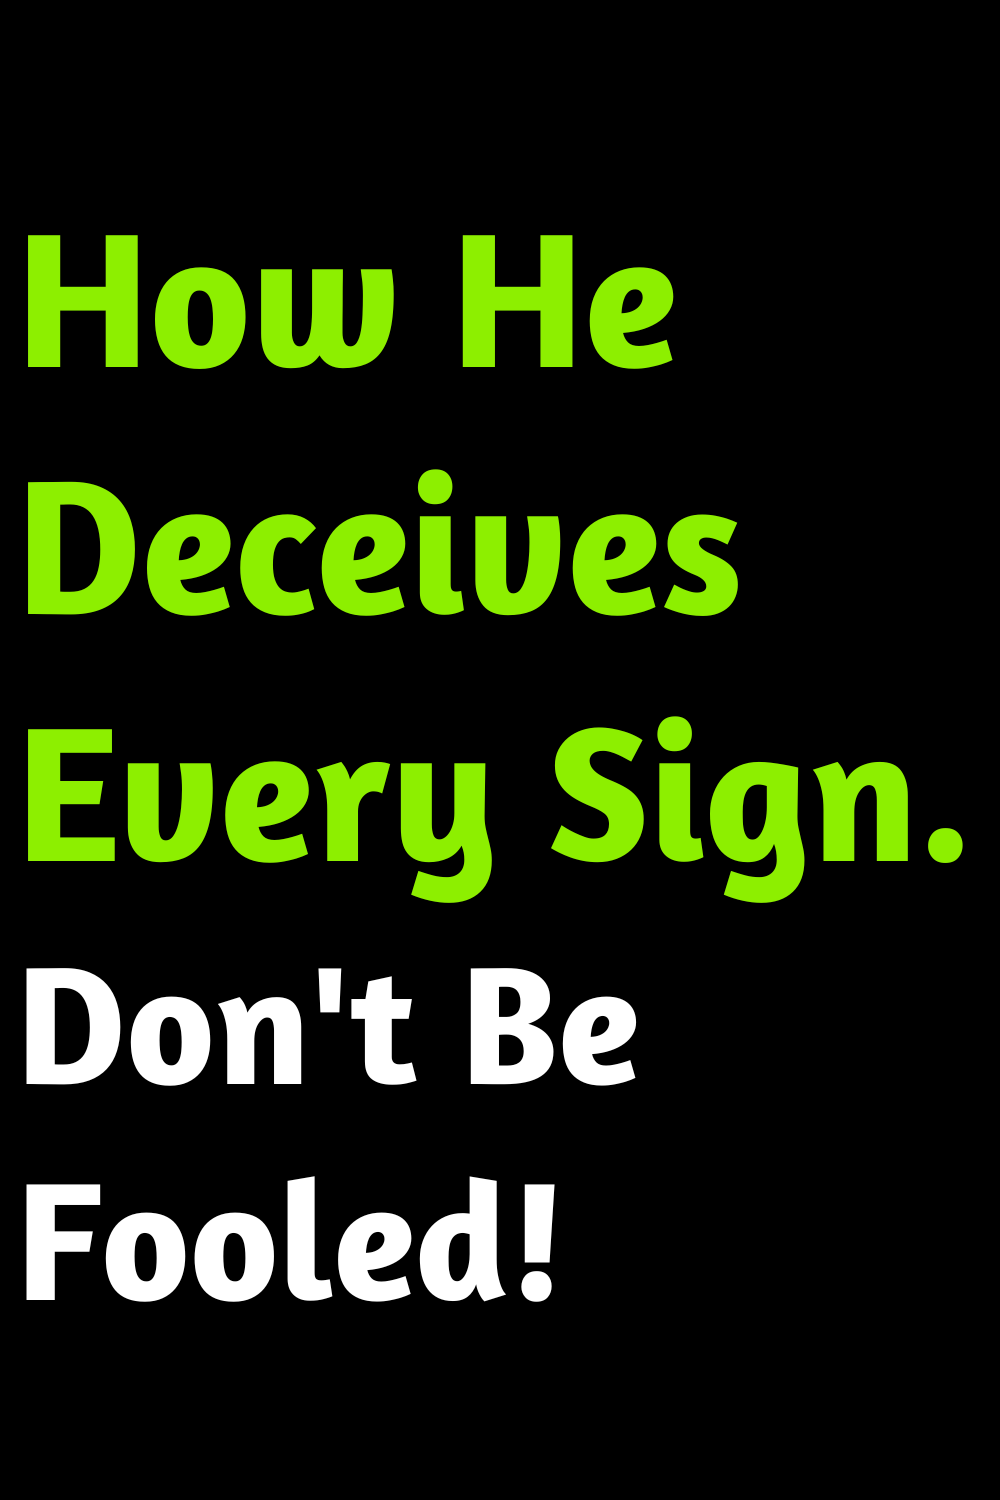 How He Deceives Every Sign. Don't Be Fooled!